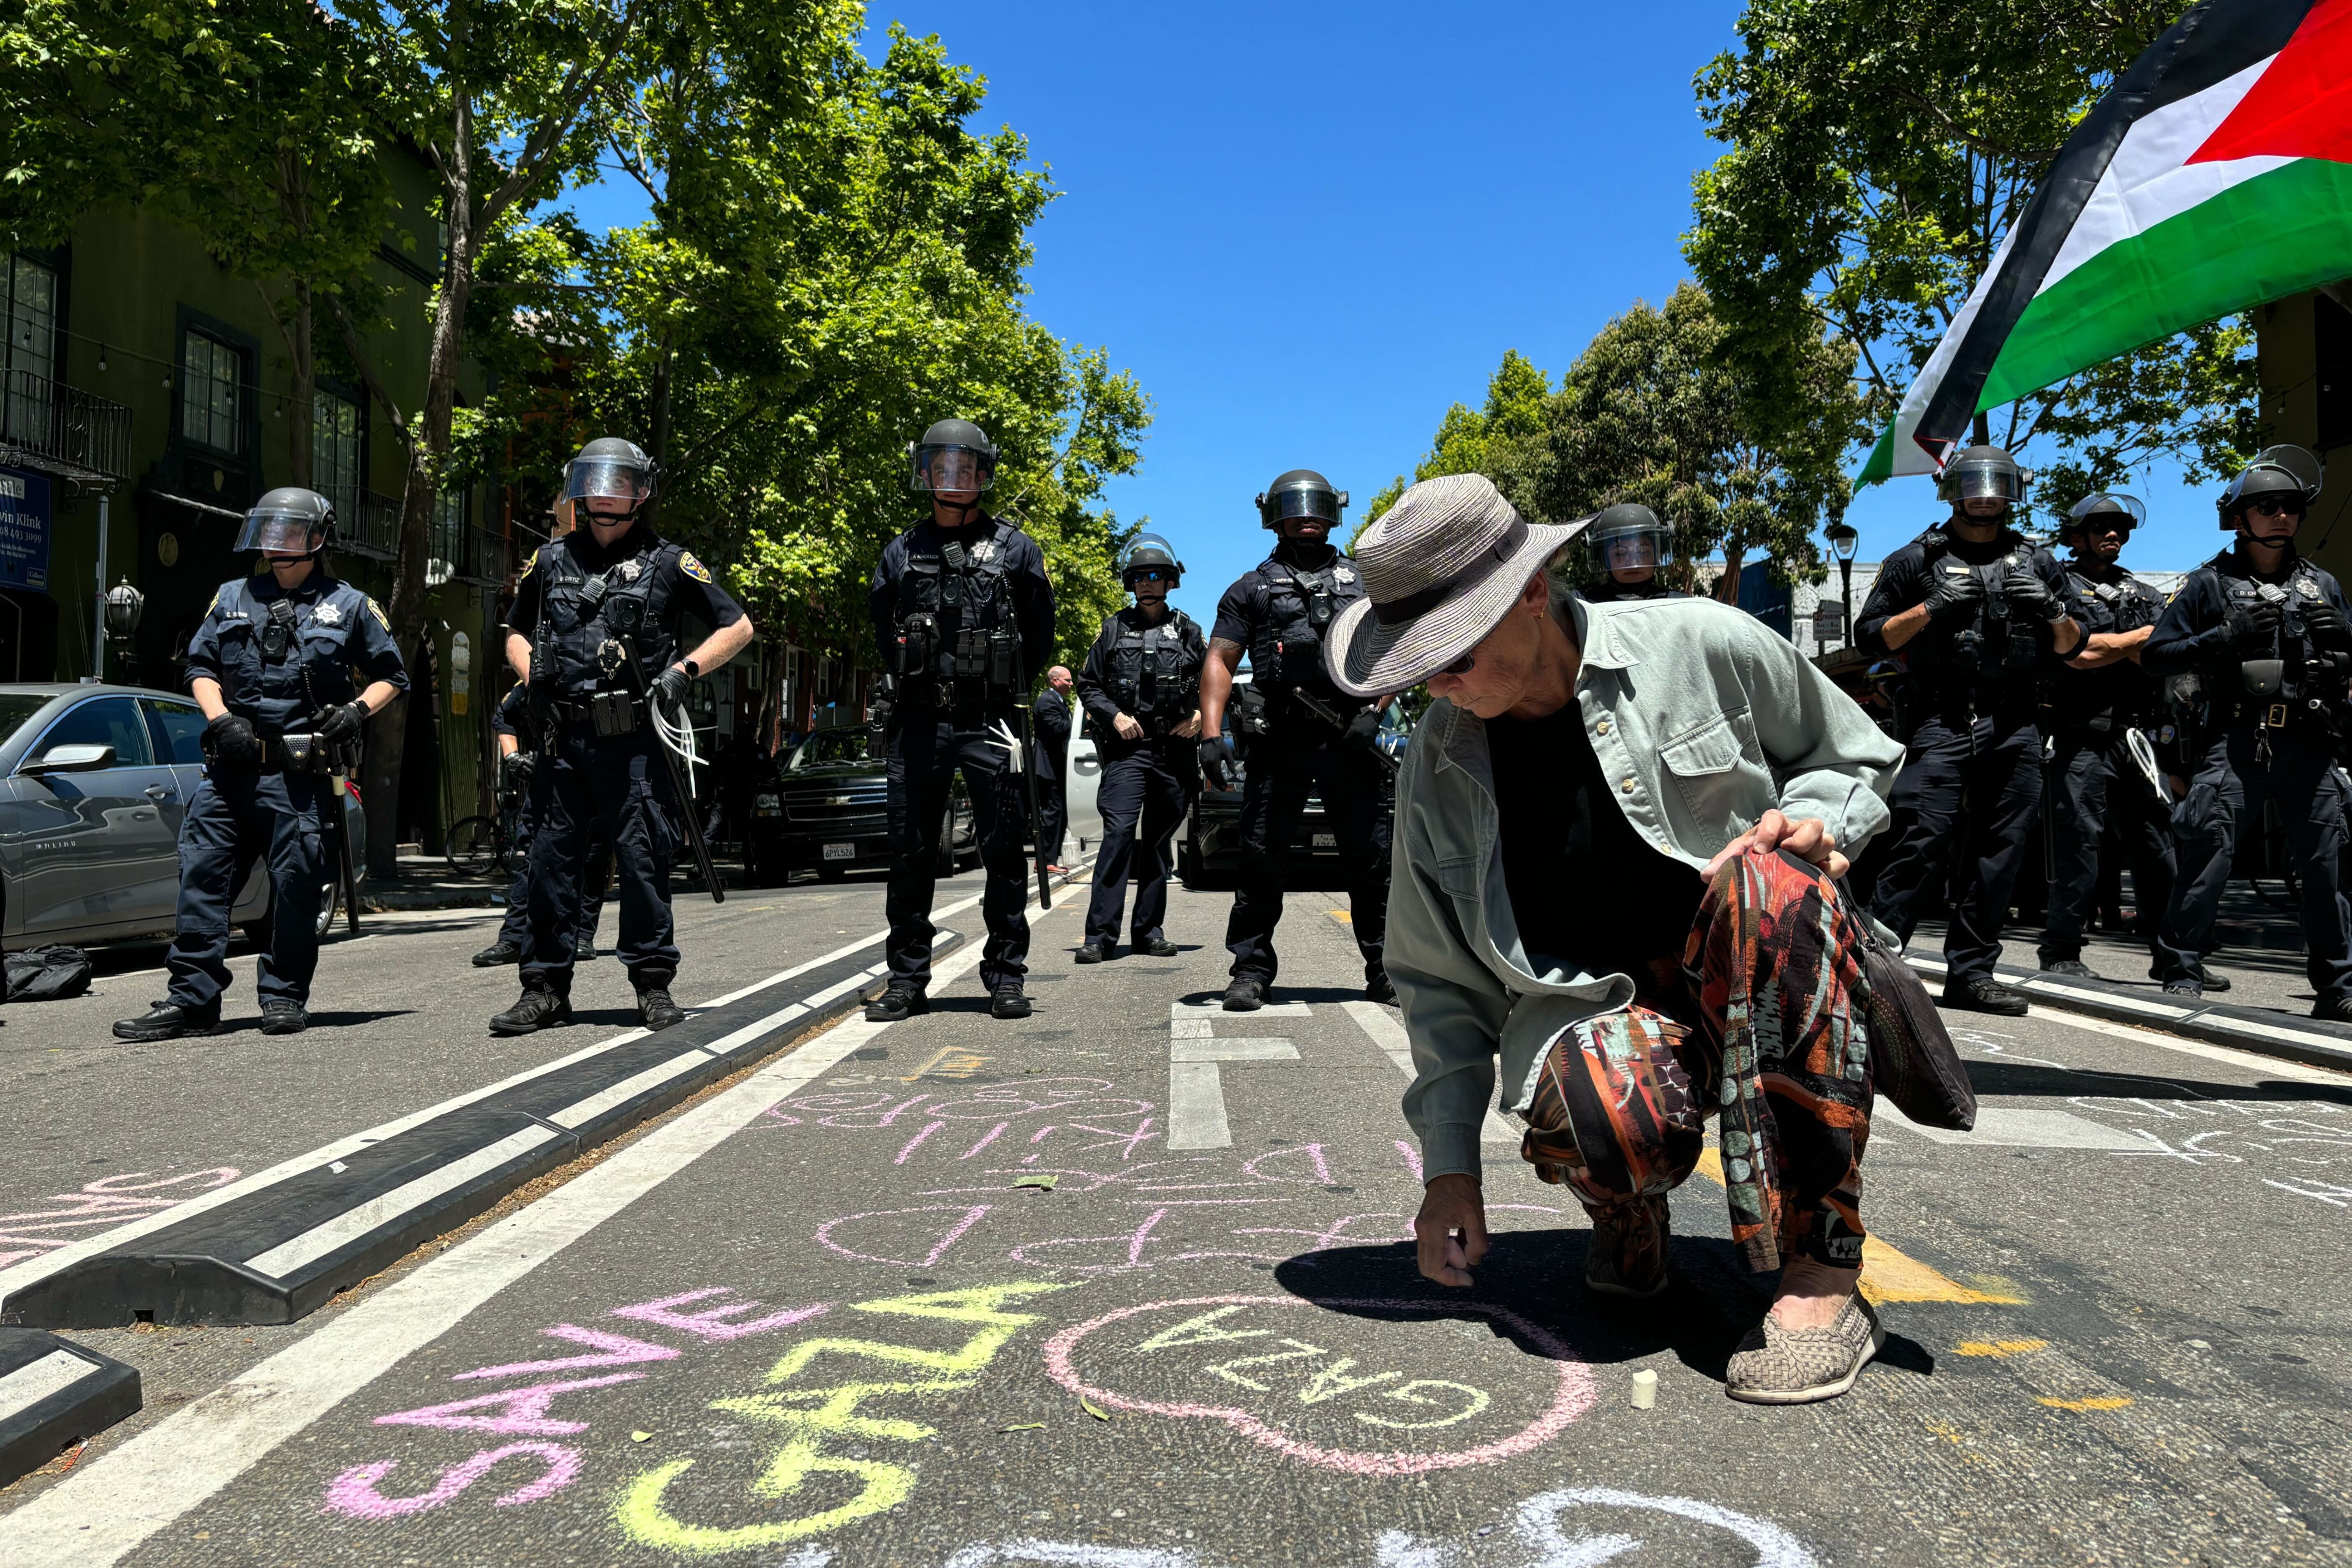 A person is writing &quot;SAVE GAZA&quot; on the street with chalk, while a line of police officers in riot gear stands behind them. A Palestinian flag is visible on the right.